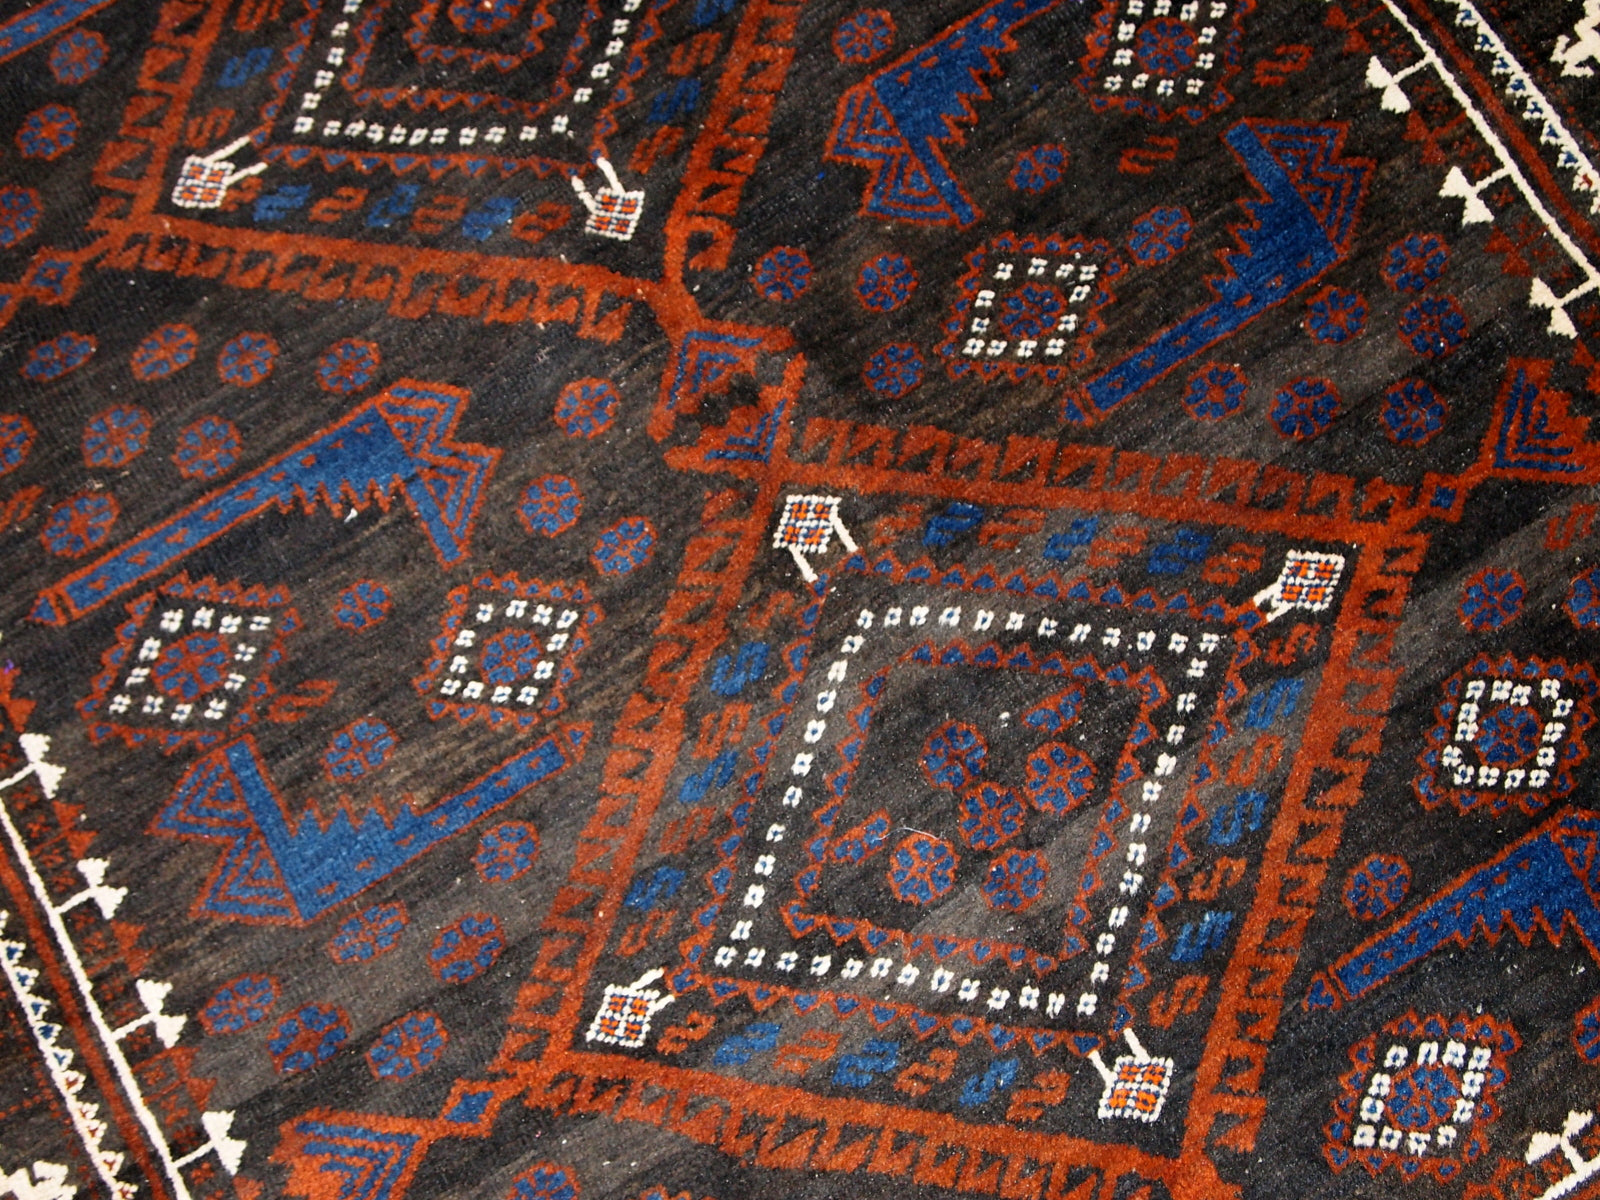 A closer look at the craftsmanship and detailed patterns on the rug.